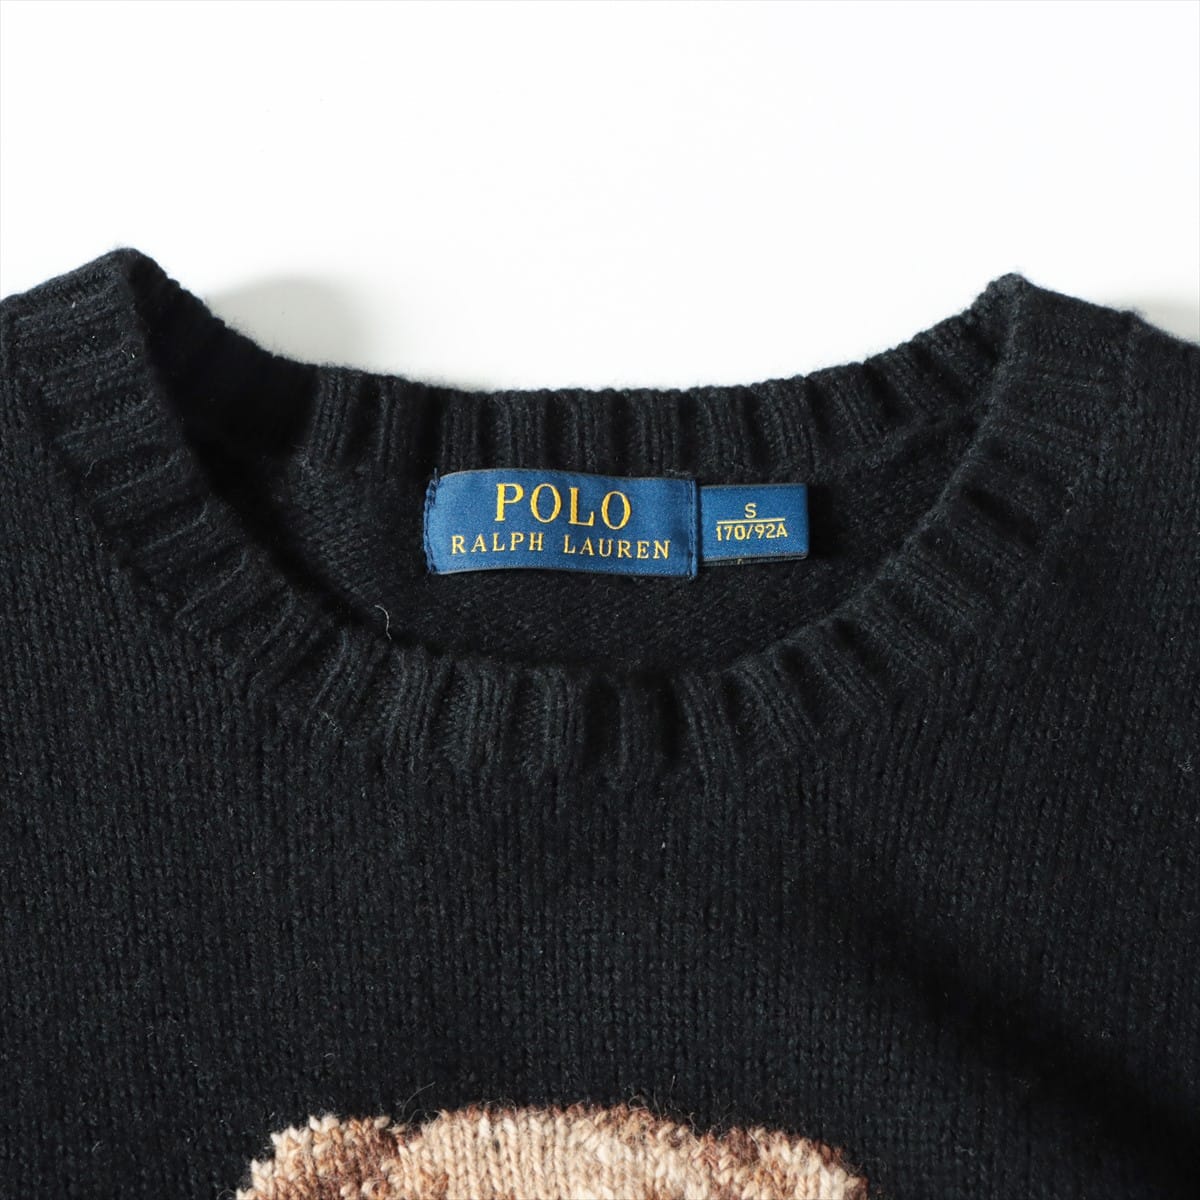 Polo Ralph Lauren Wool Sweater S Men's Black  Polo bear Cut part of the tag